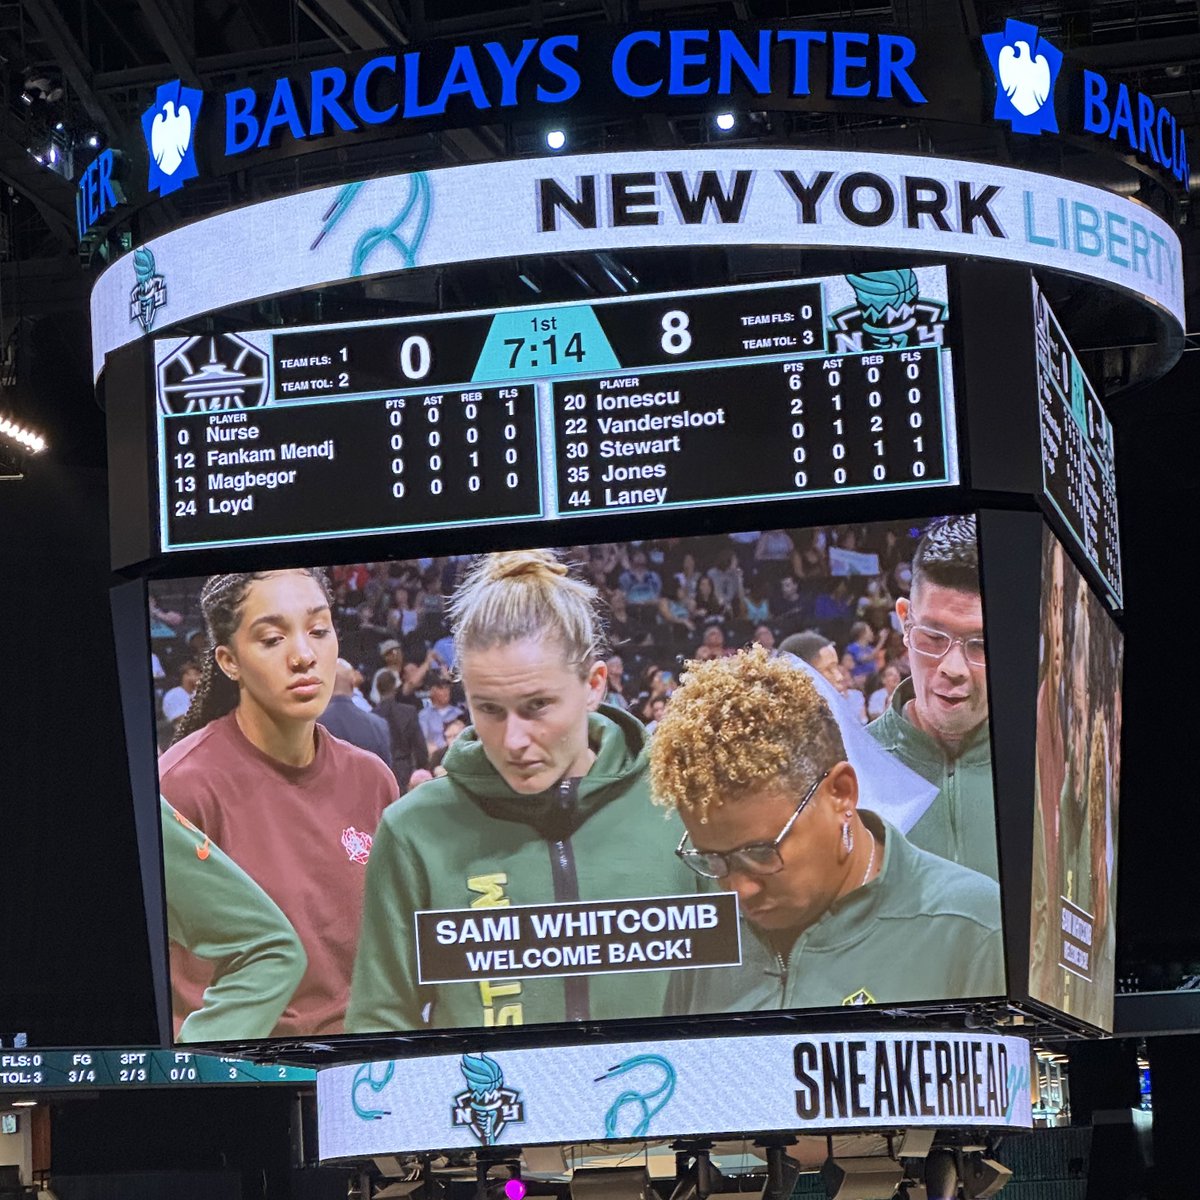 The Barclays Center cheered as a Sami Whitcomb Welcome Back graphic was displayed. #WNBATwitter https://t.co/jLWhNfRAsT